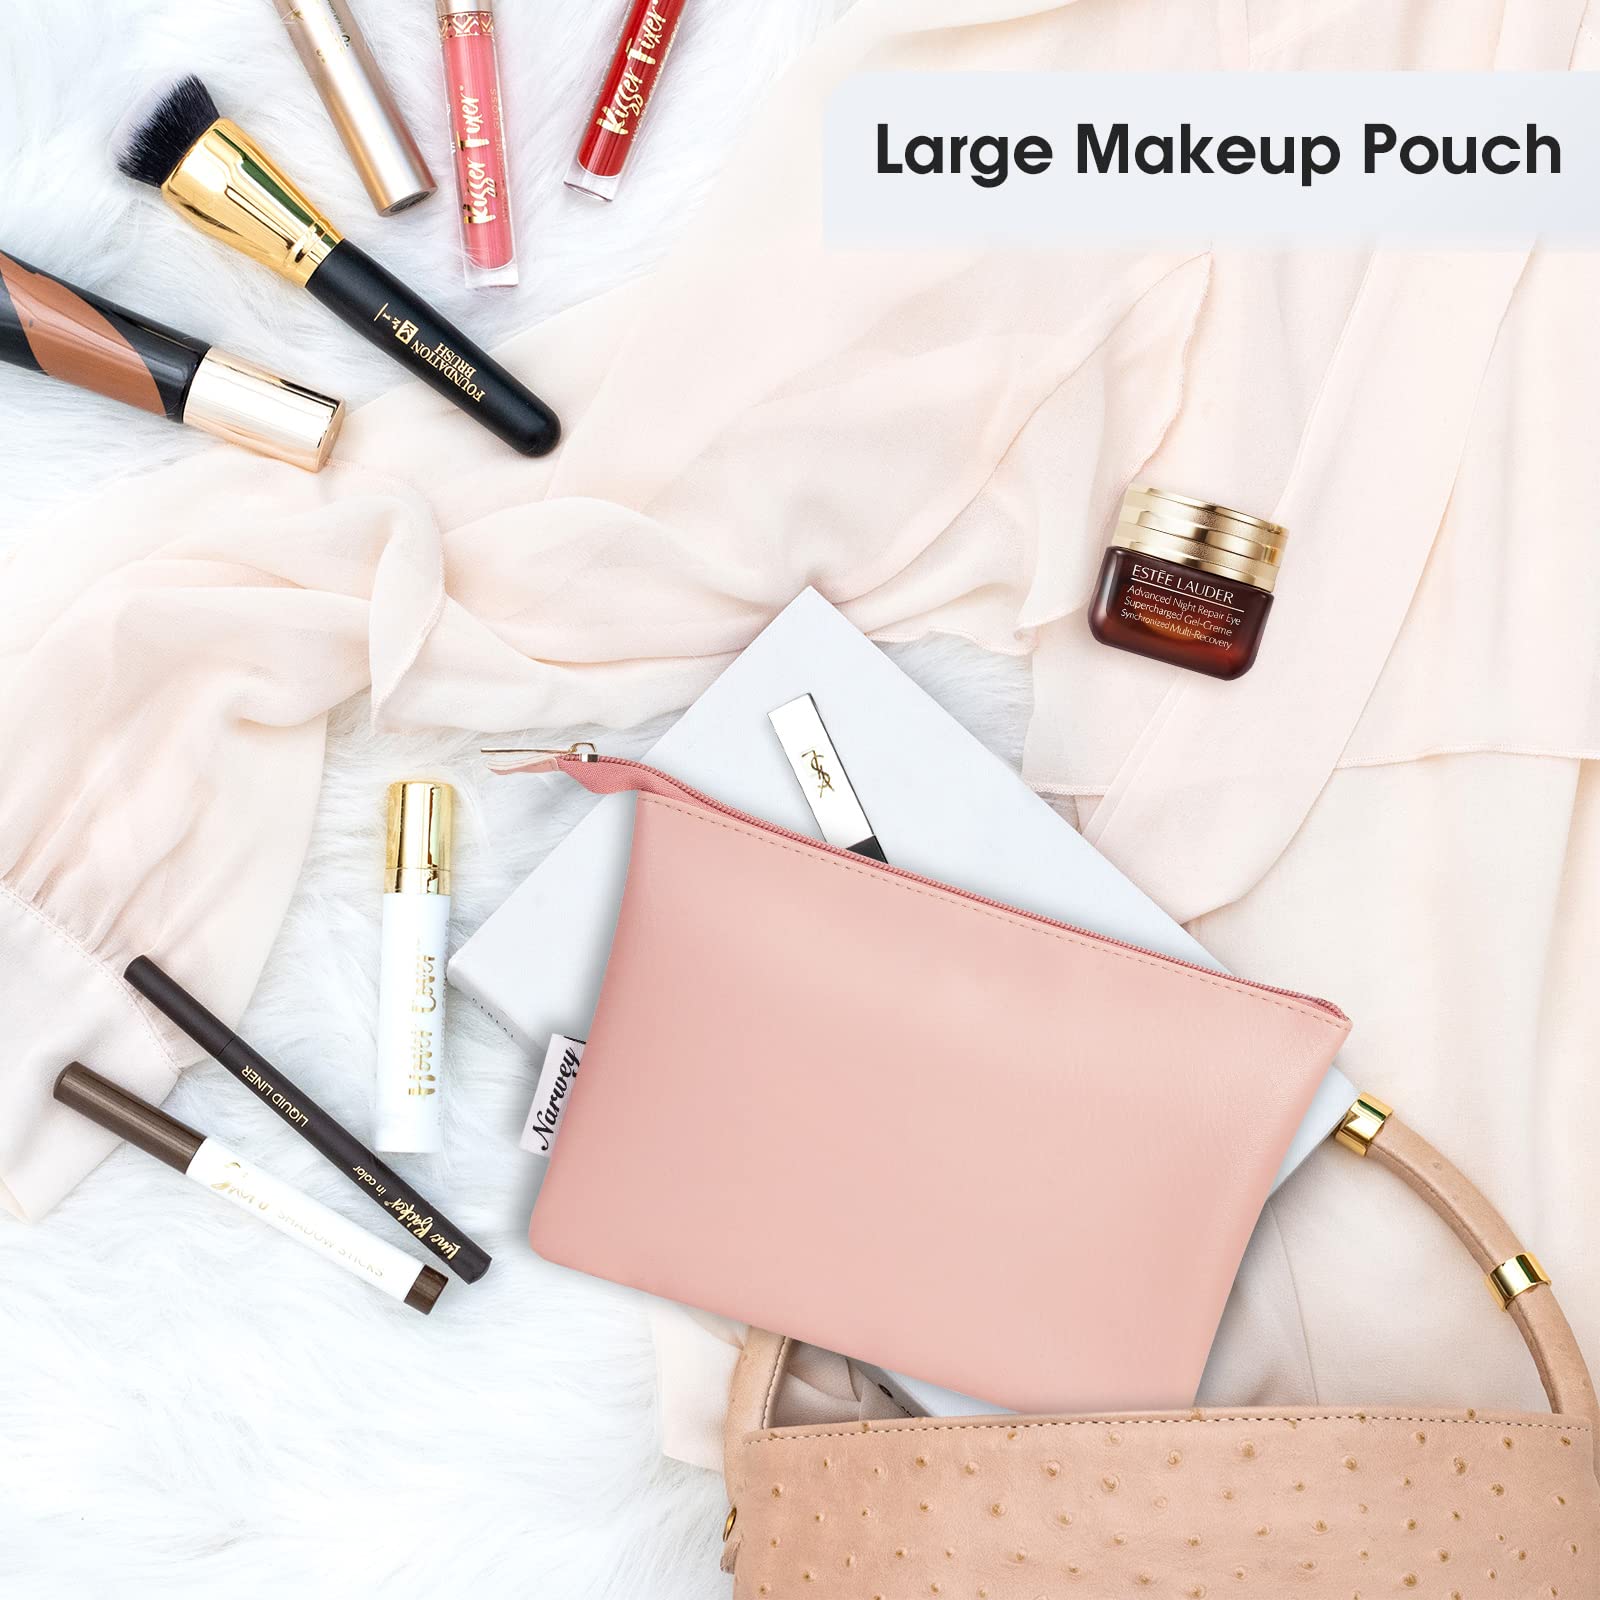 Found: The Best Travel Makeup Bags to Hold All Your Beloved Beauty Products  | Leather makeup bag, Makeup bags travel, Makeup storage bag